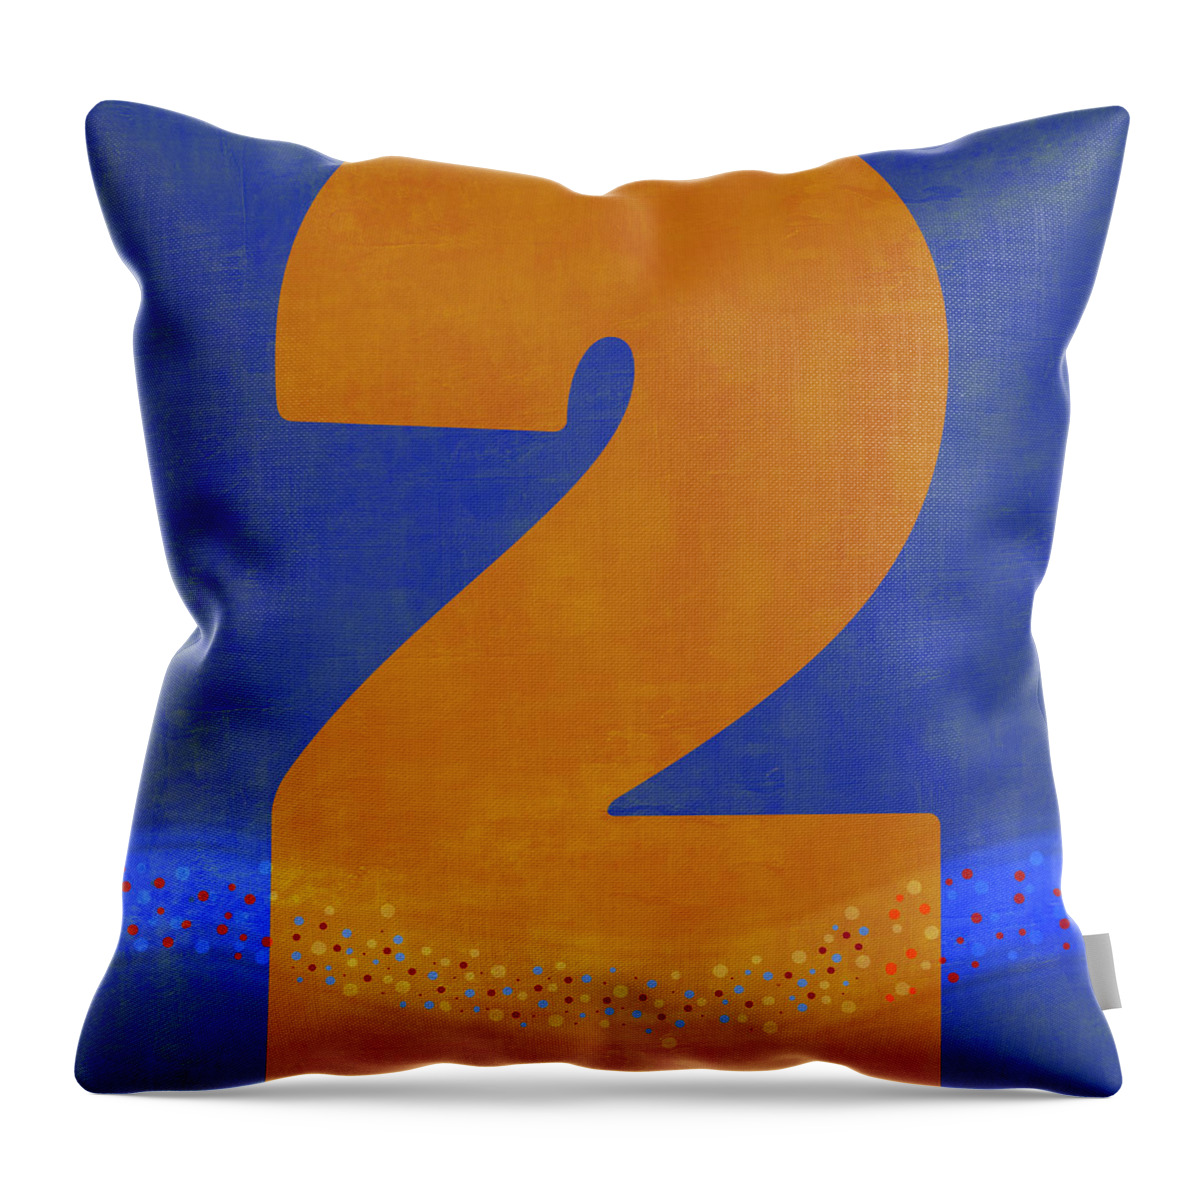 Yellow Throw Pillow featuring the photograph Number Two Flotation Device by Carol Leigh